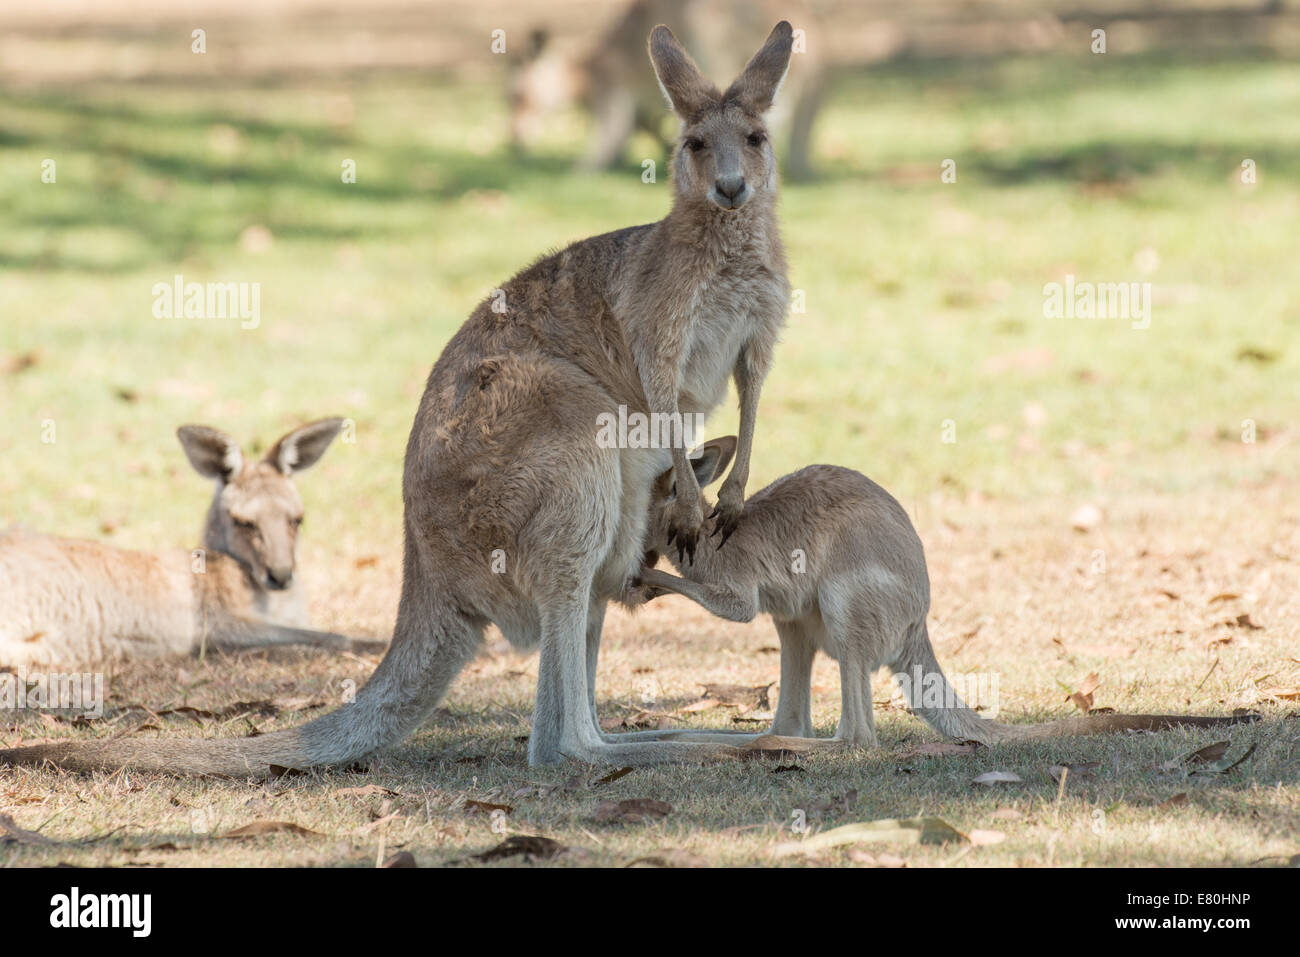 Stock photo of an eastern grey kangaroo joey trying to climb into his mother's pouch. Stock Photo